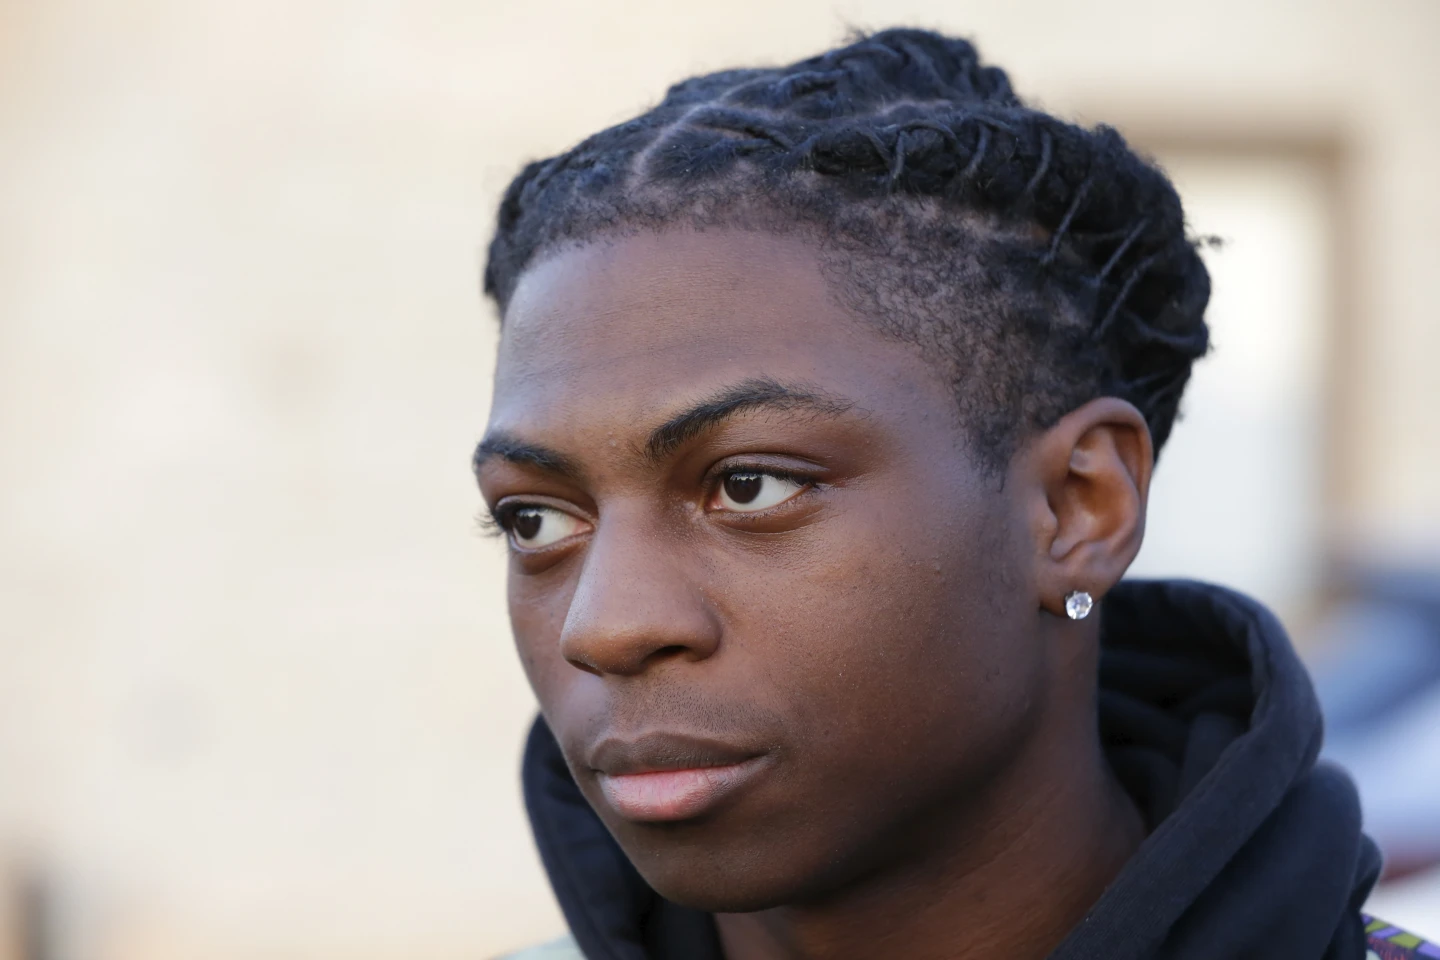 Texas high school sends Black student back to in-school suspension over his locs hairstyle (apnews.com)